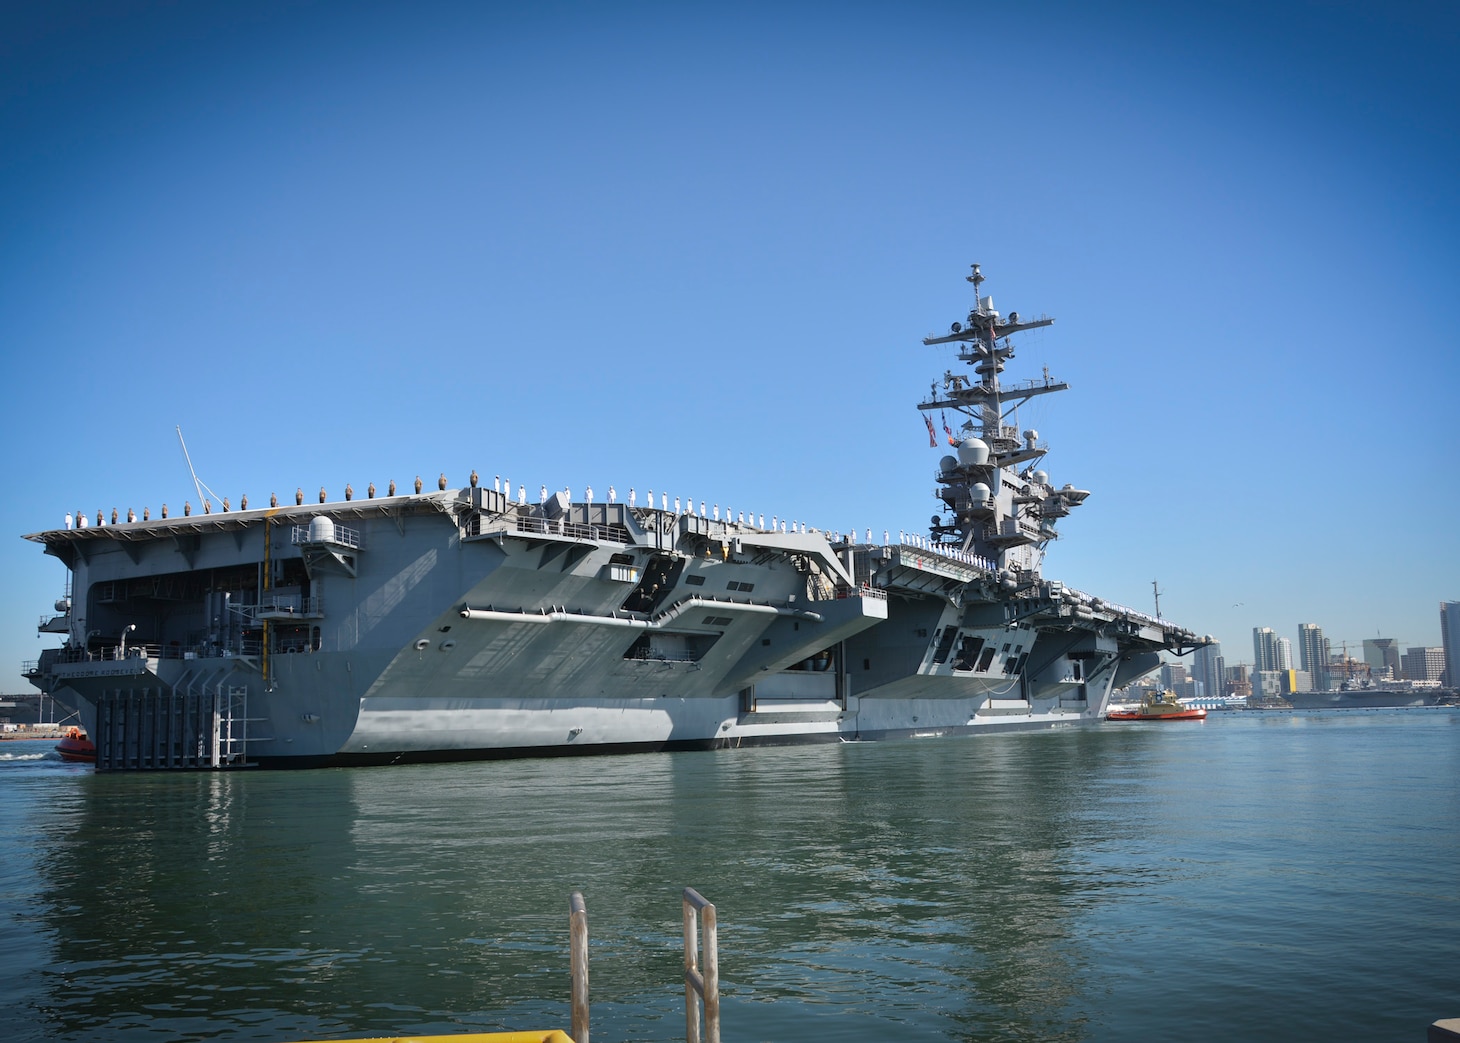 SAN DIEGO (Oct. 6, 2017) Sailors and Marines aboard the aircraft carrier USS Theodore Roosevelt (CVN 71) man the rails as the ship departs its homeport of San Diego. Theodore Roosevelt departed San Diego for a regularly scheduled deployment to the U.S. 7th and 5th Fleet areas of responsibility, in support of maritime security operations and theater security cooperation efforts.